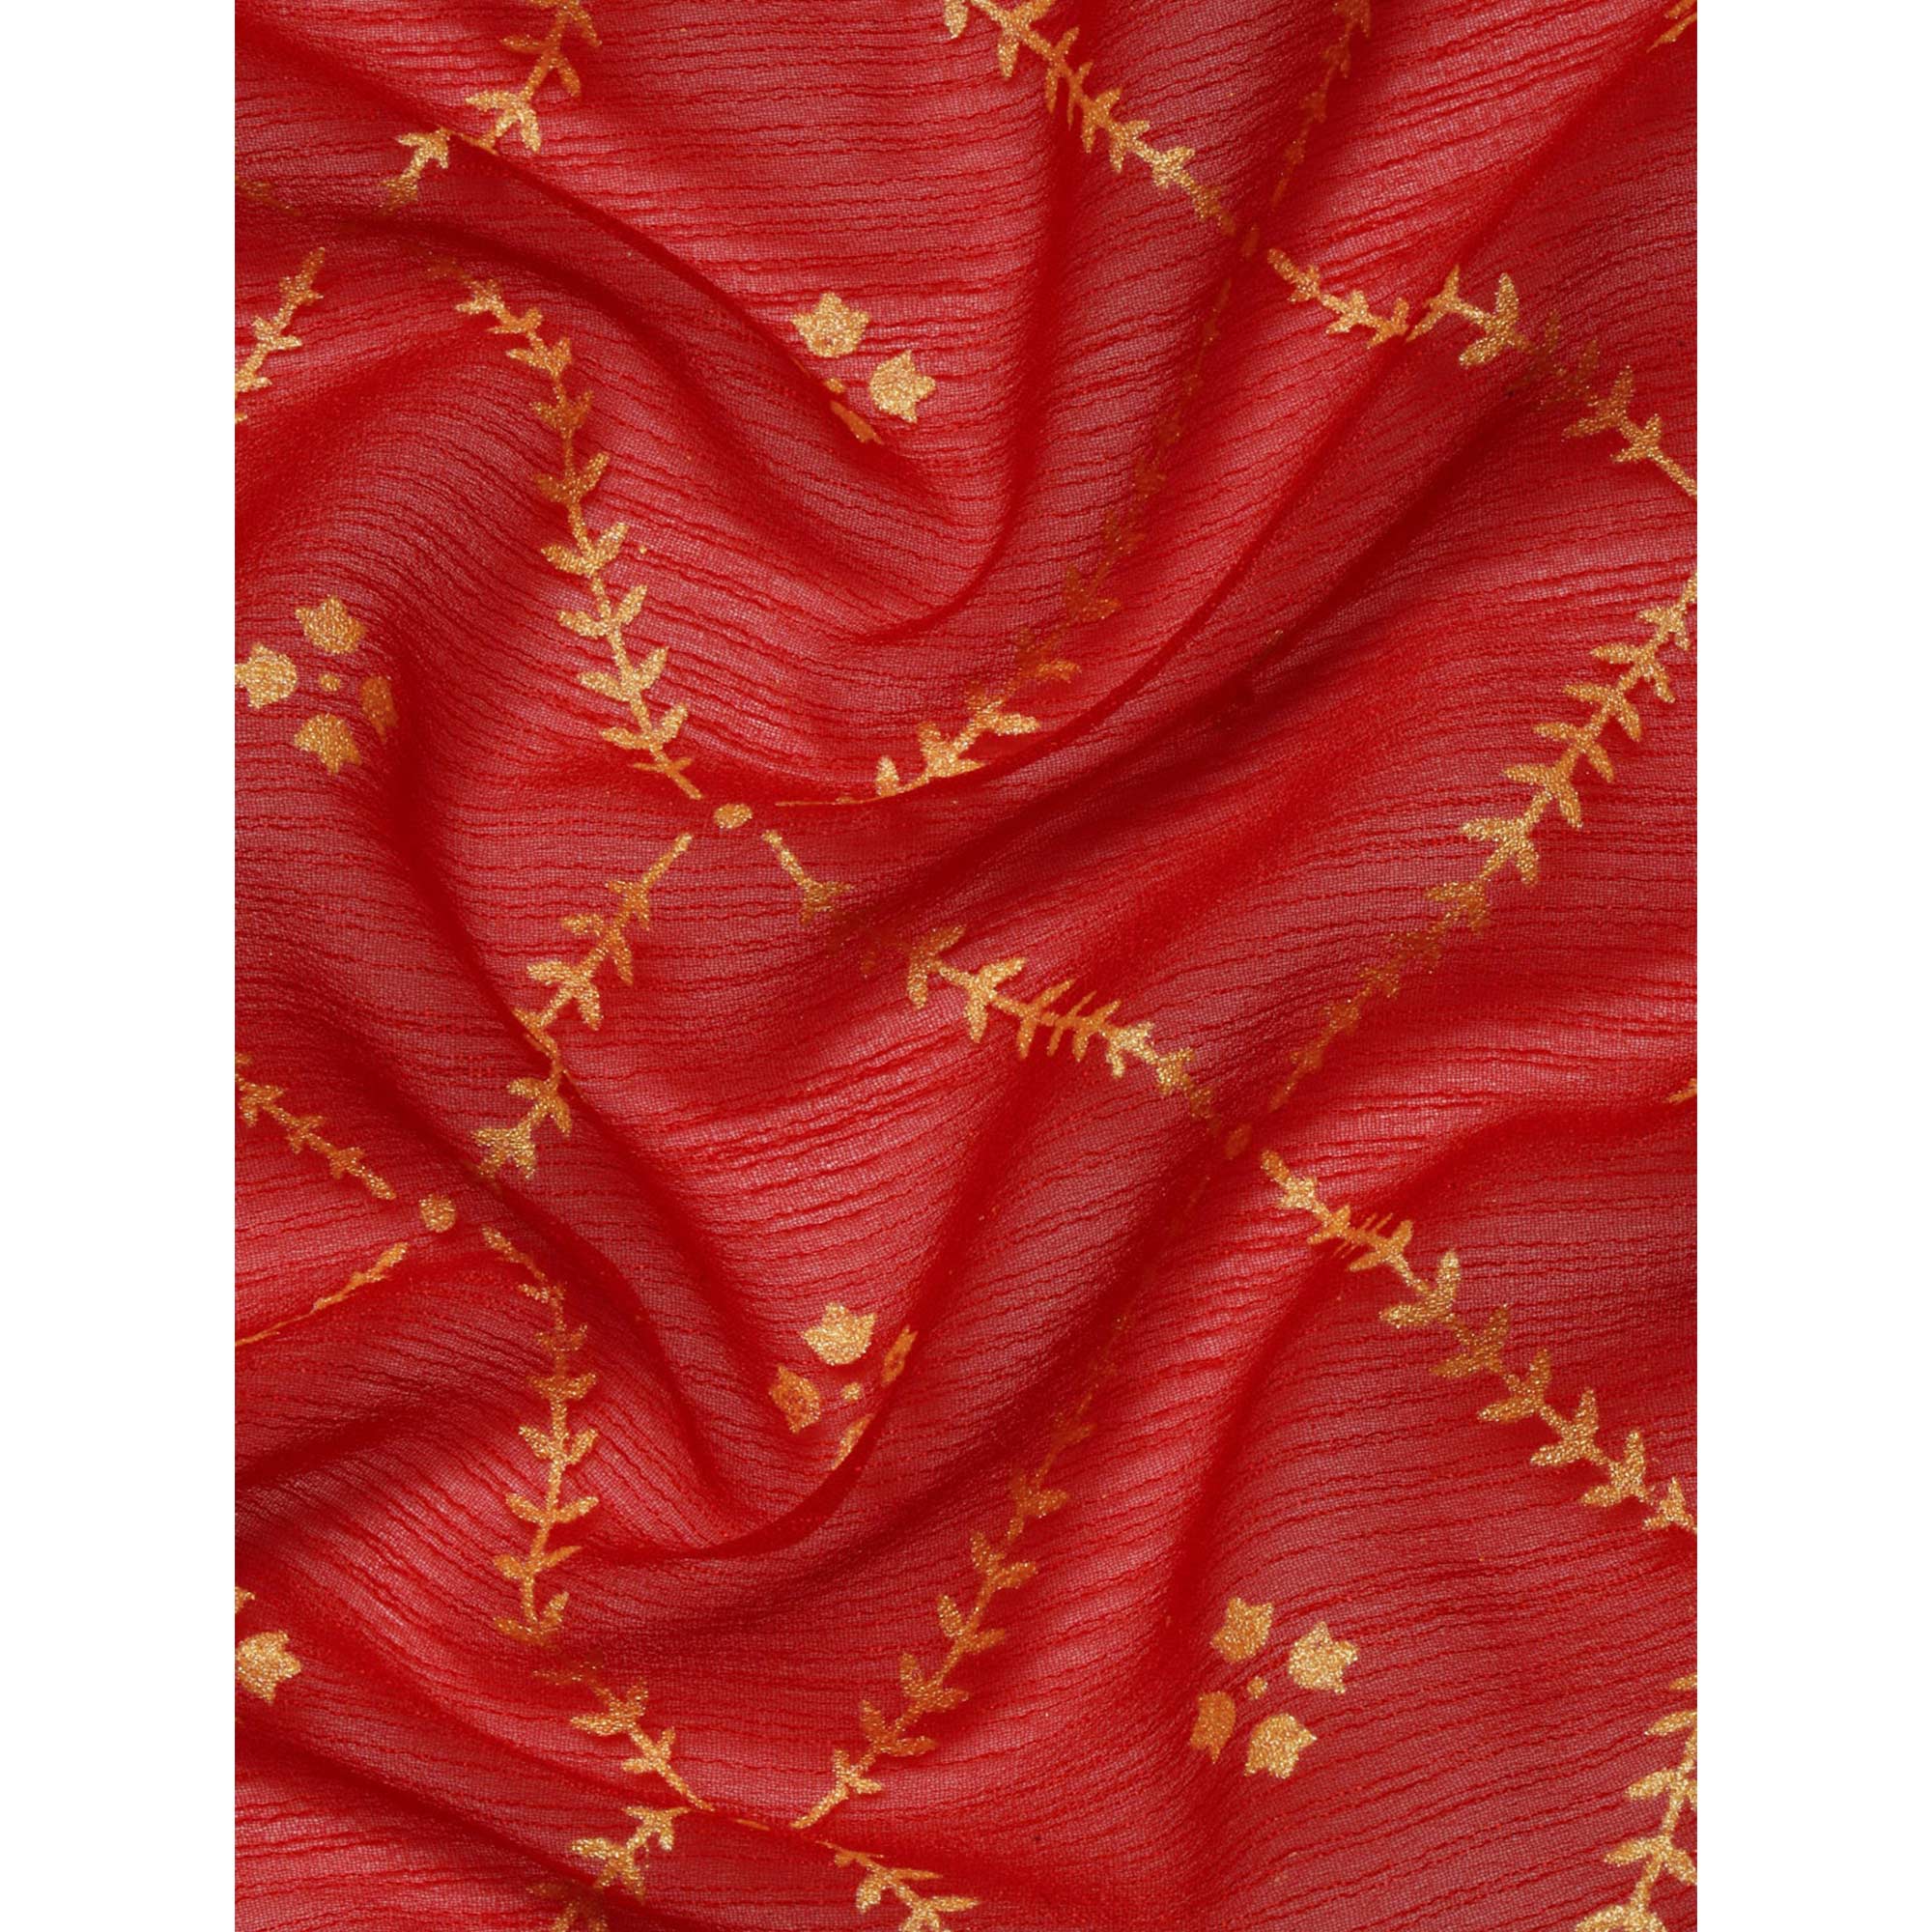 Red Floral Foil Printed Zomato Saree